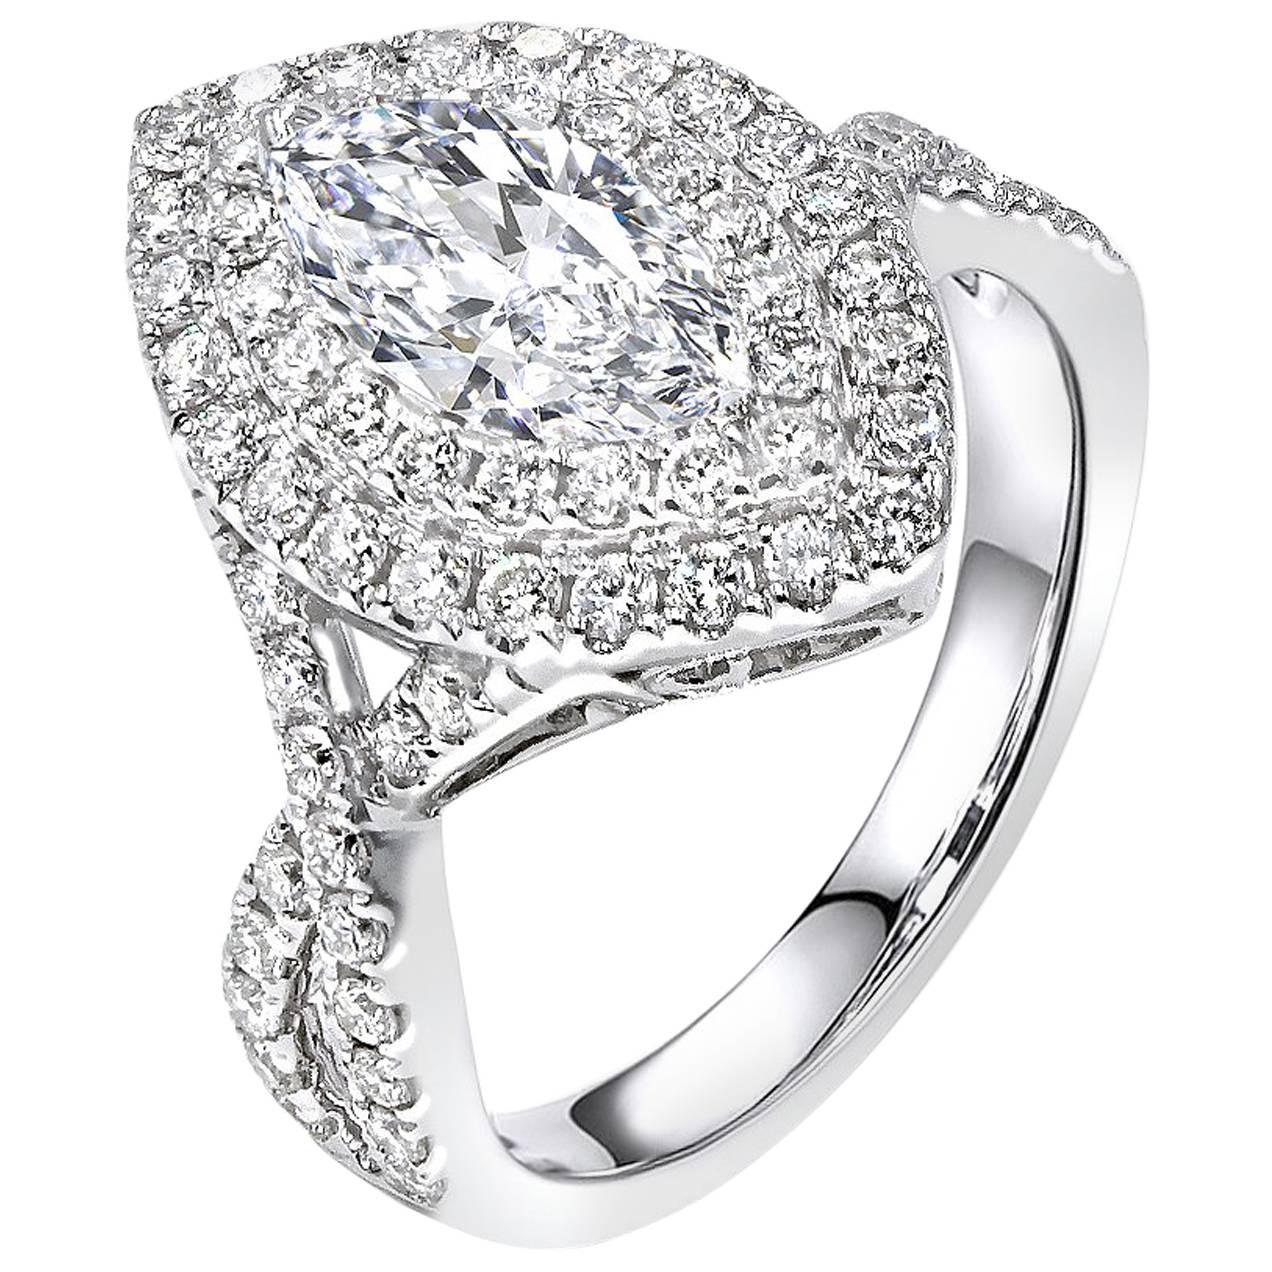 1.20 Carat Marquise Cut Diamond Engagement Ring For Sale